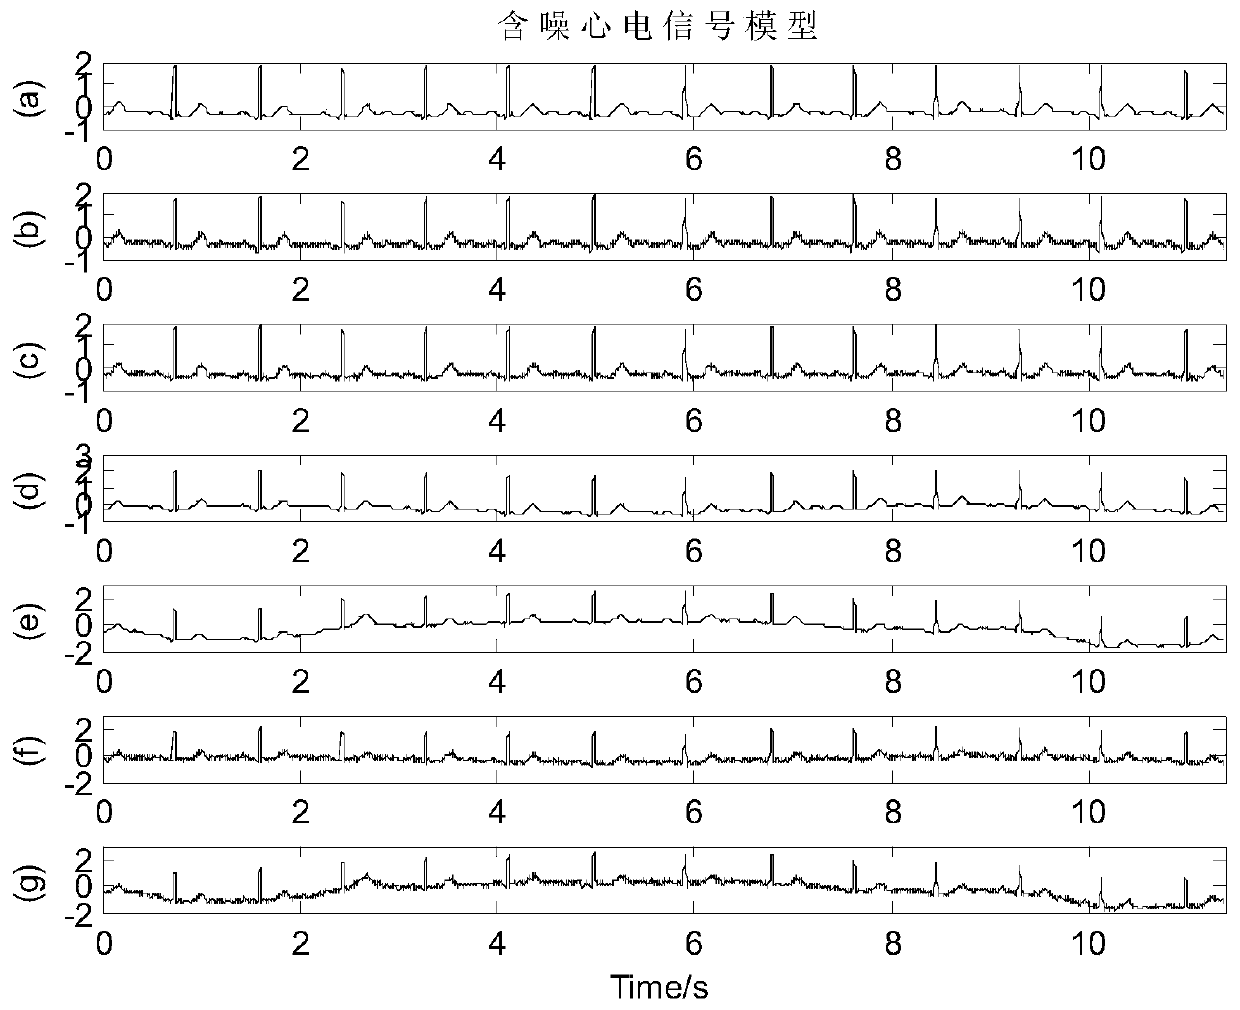 Integrated filtering method for ECG signals based on wavelet transform and improved EEMD